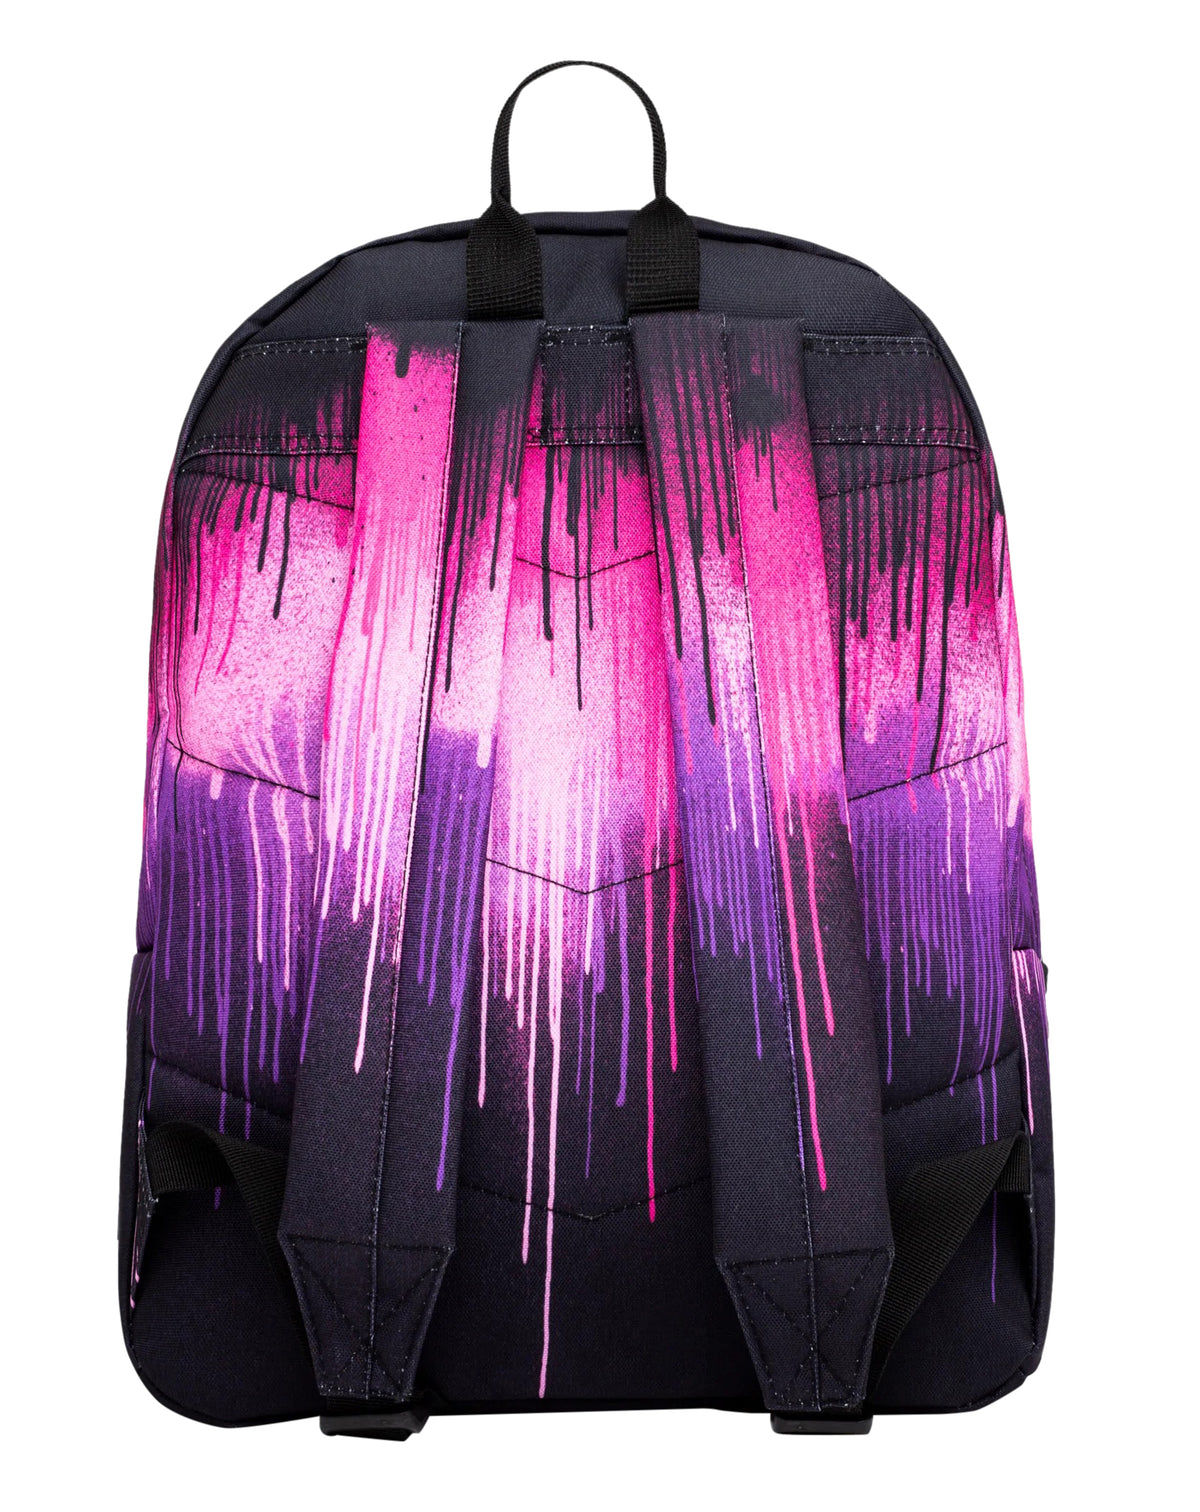 Hype Classic Backpack - Purple & Pink Drip